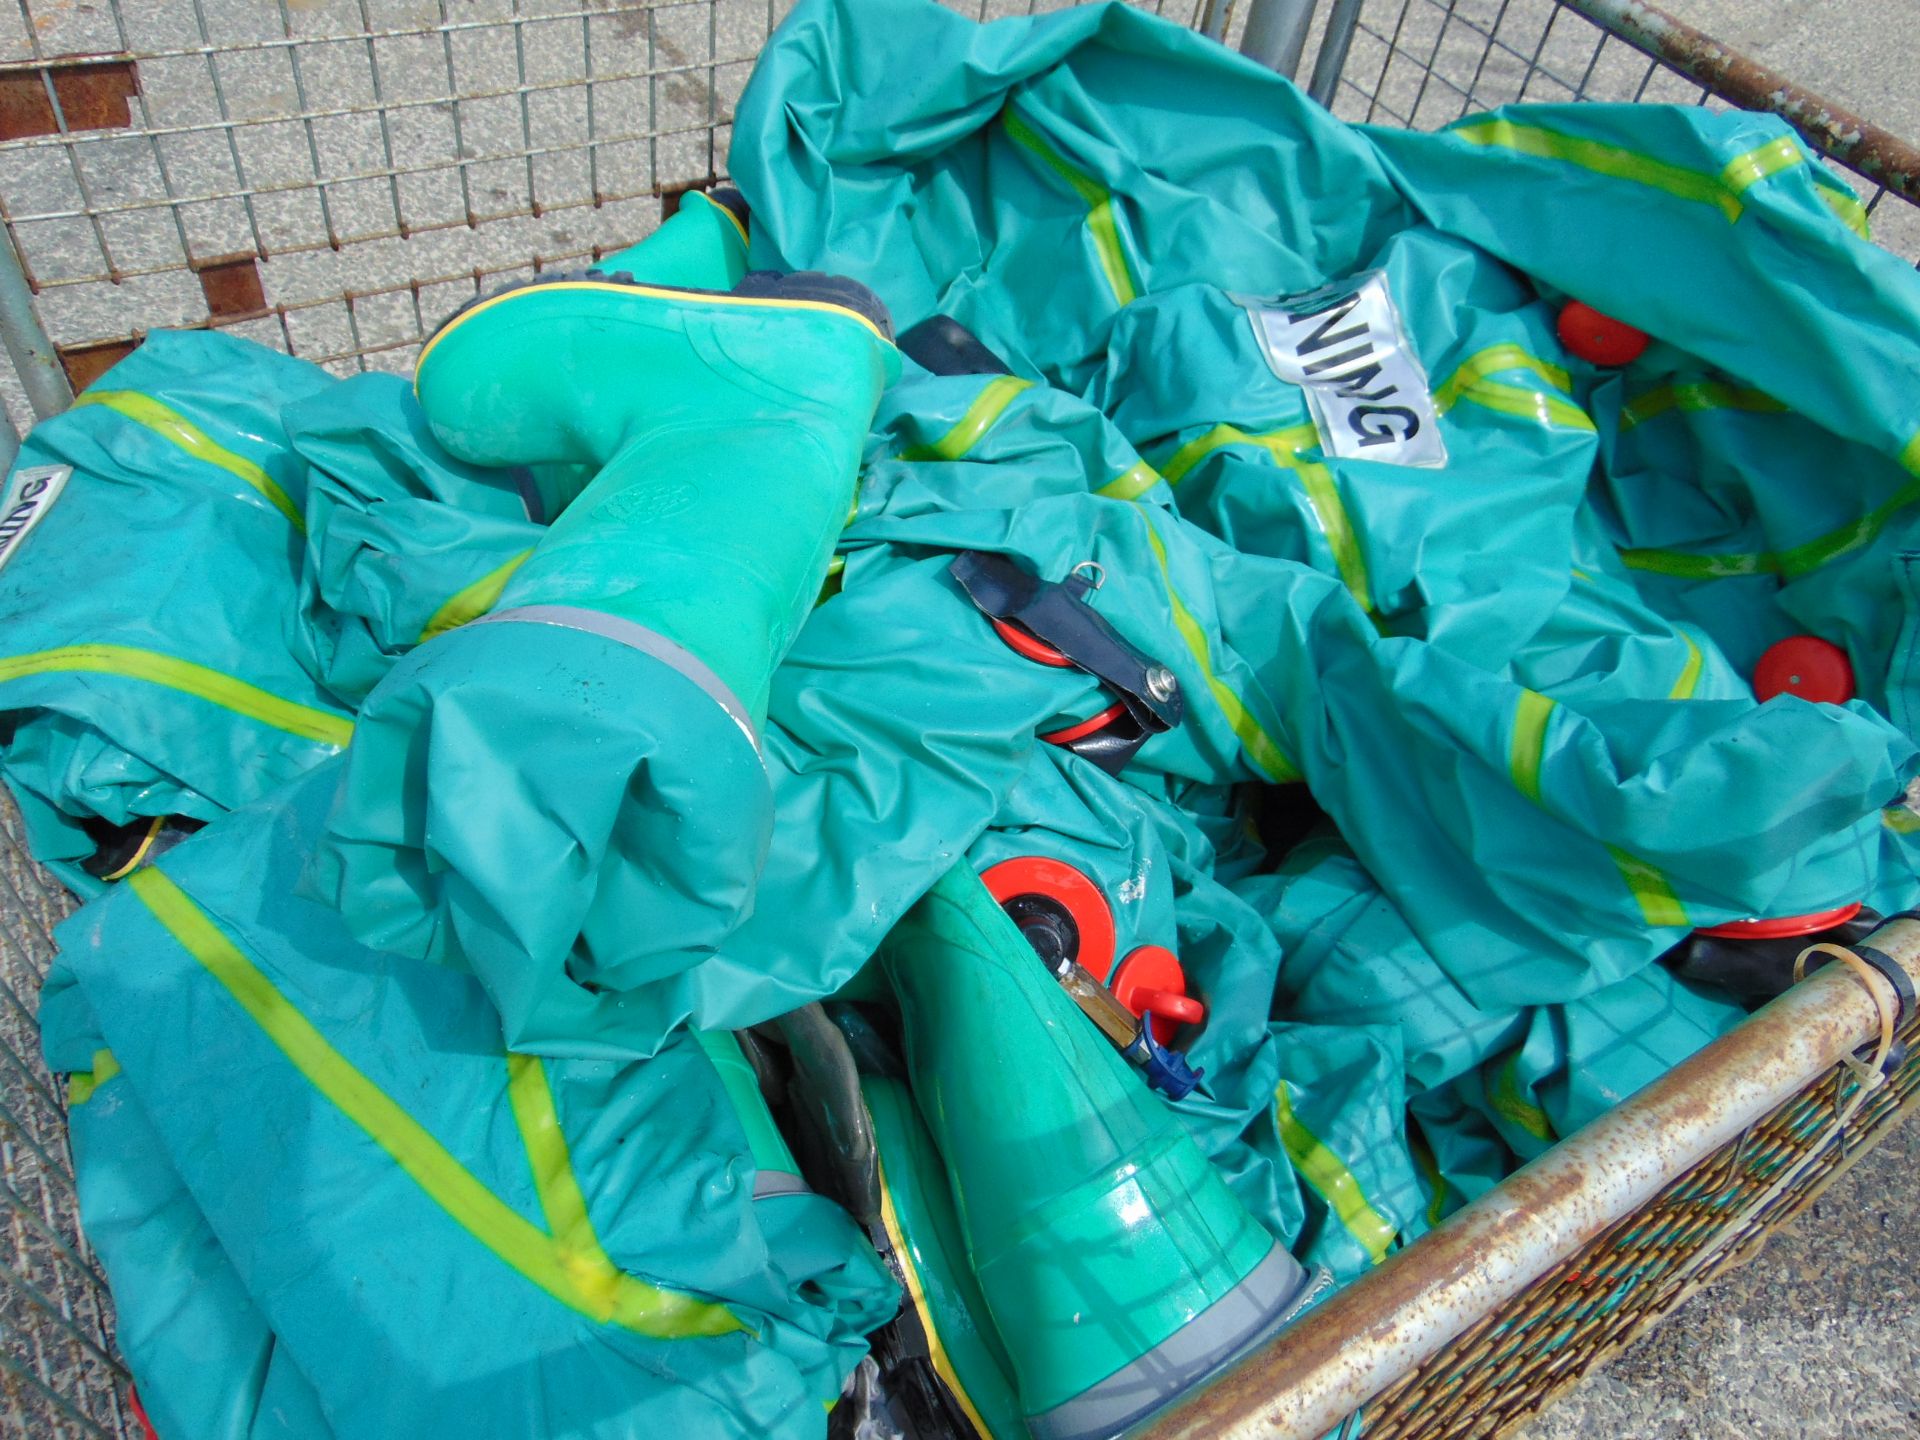 10 x Respirex Tychem TK Gas-Tight Hazmat Suit Type 1A with Attached Boots and Gloves - Image 4 of 7